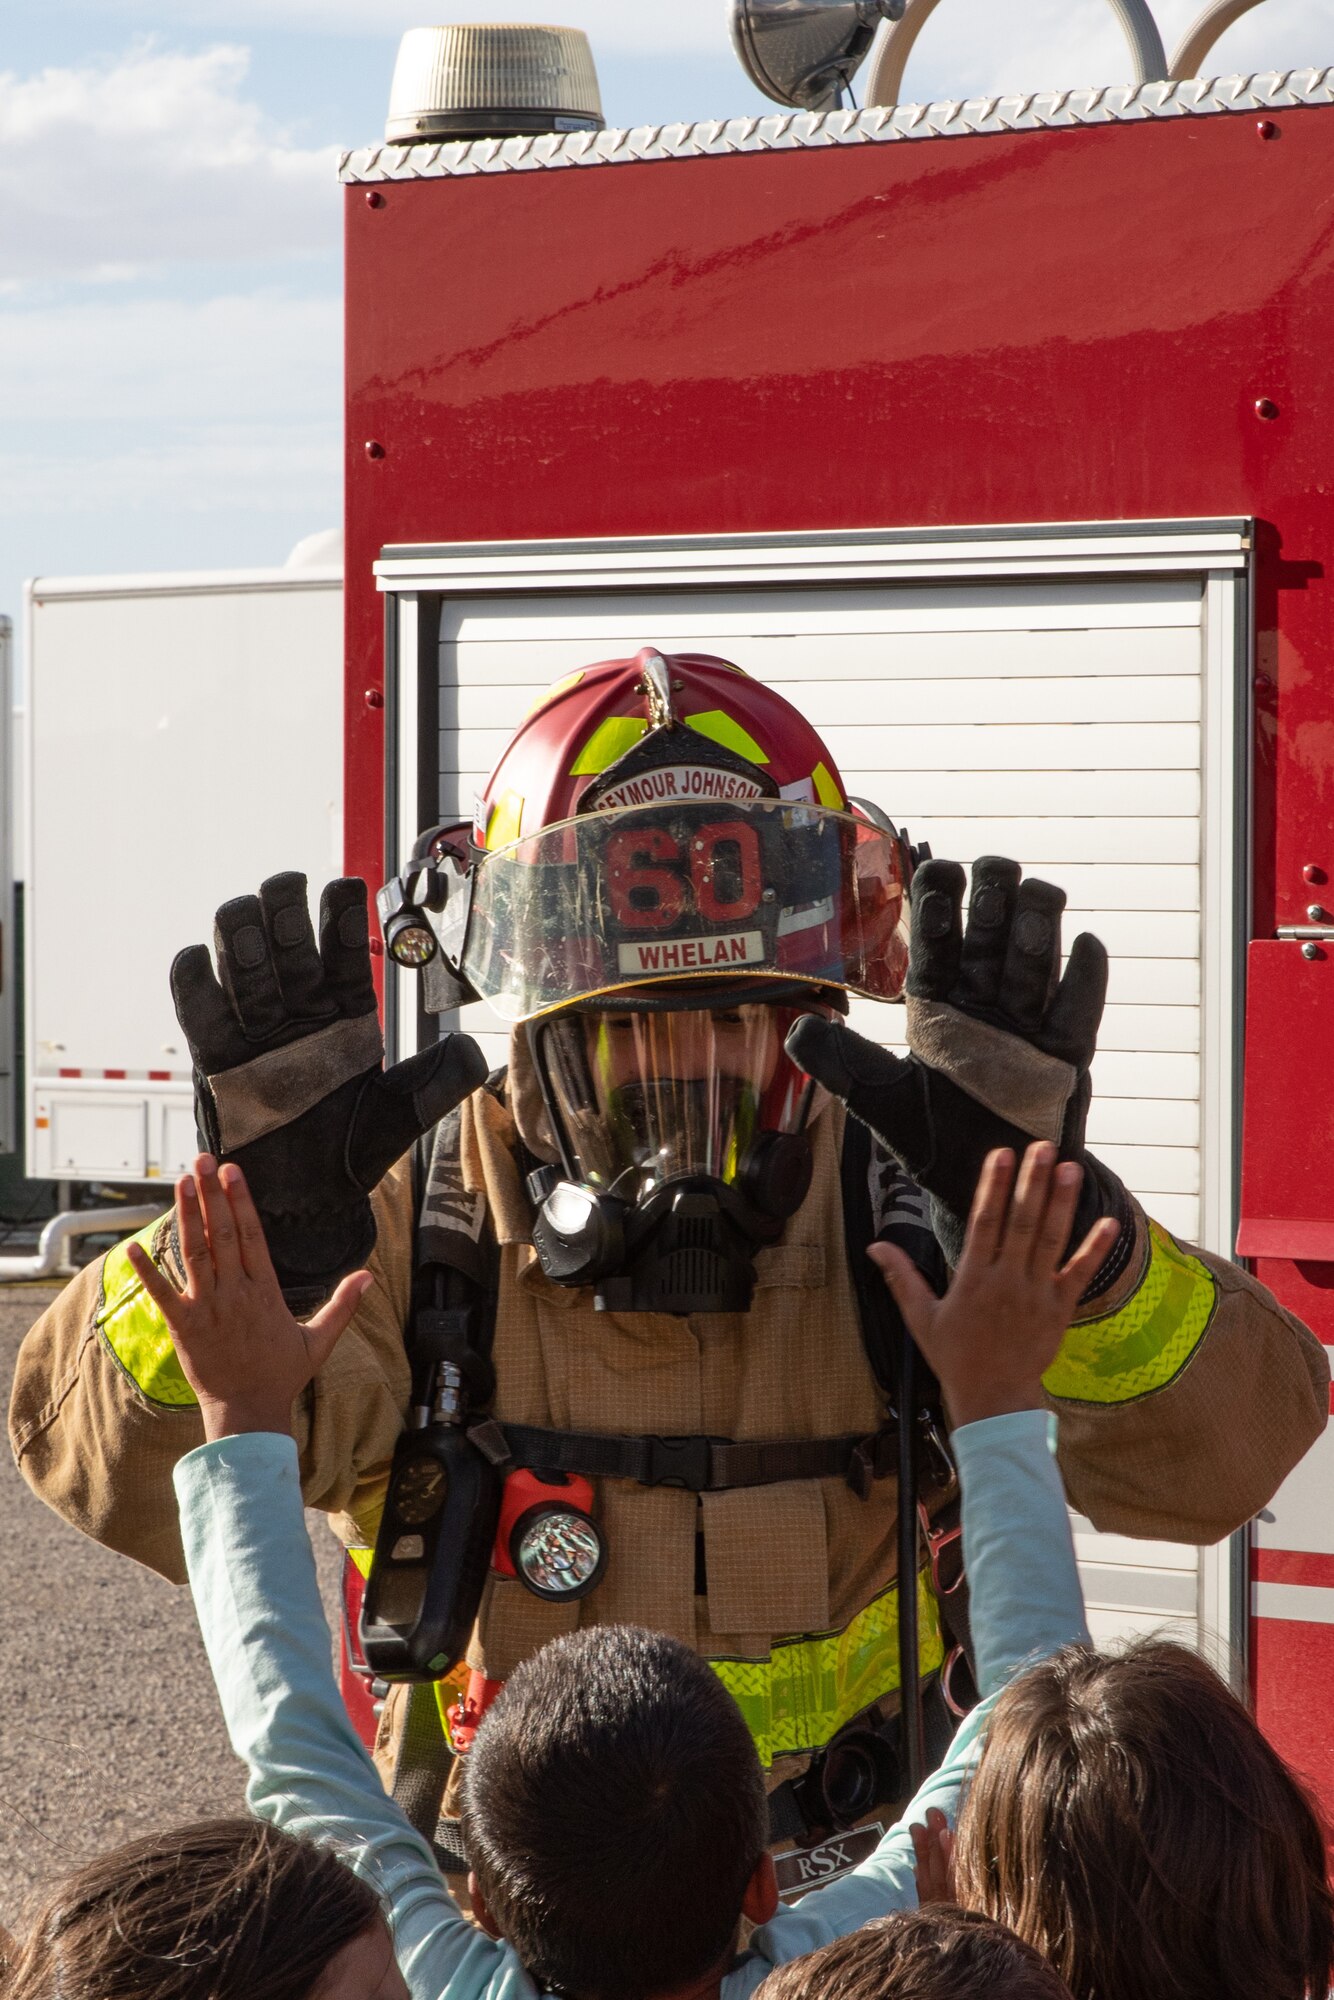 Tech. Sgt. Matt Whelan, Task Force-Holloman firefighter deployed from Seymour Johnson Air Force Base, North Carolina, gives a high five to an Afghan child during a fire safety class on Holloman Air Force Base, New Mexico, Oct. 11, 2021. The Department of Defense, through the U.S. Northern Command, and in support of the Department of State and Department of Homeland Security, is providing transportation, temporary housing, medical screening, and general support for at least 50,000 Afghan evacuees at suitable facilities, in permanent or temporary structures, as quickly as possible. This initiative provides Afghan evacuees essential support at secure locations outside Afghanistan. (U.S. Army photo by Spc. Nicholas Goodman)